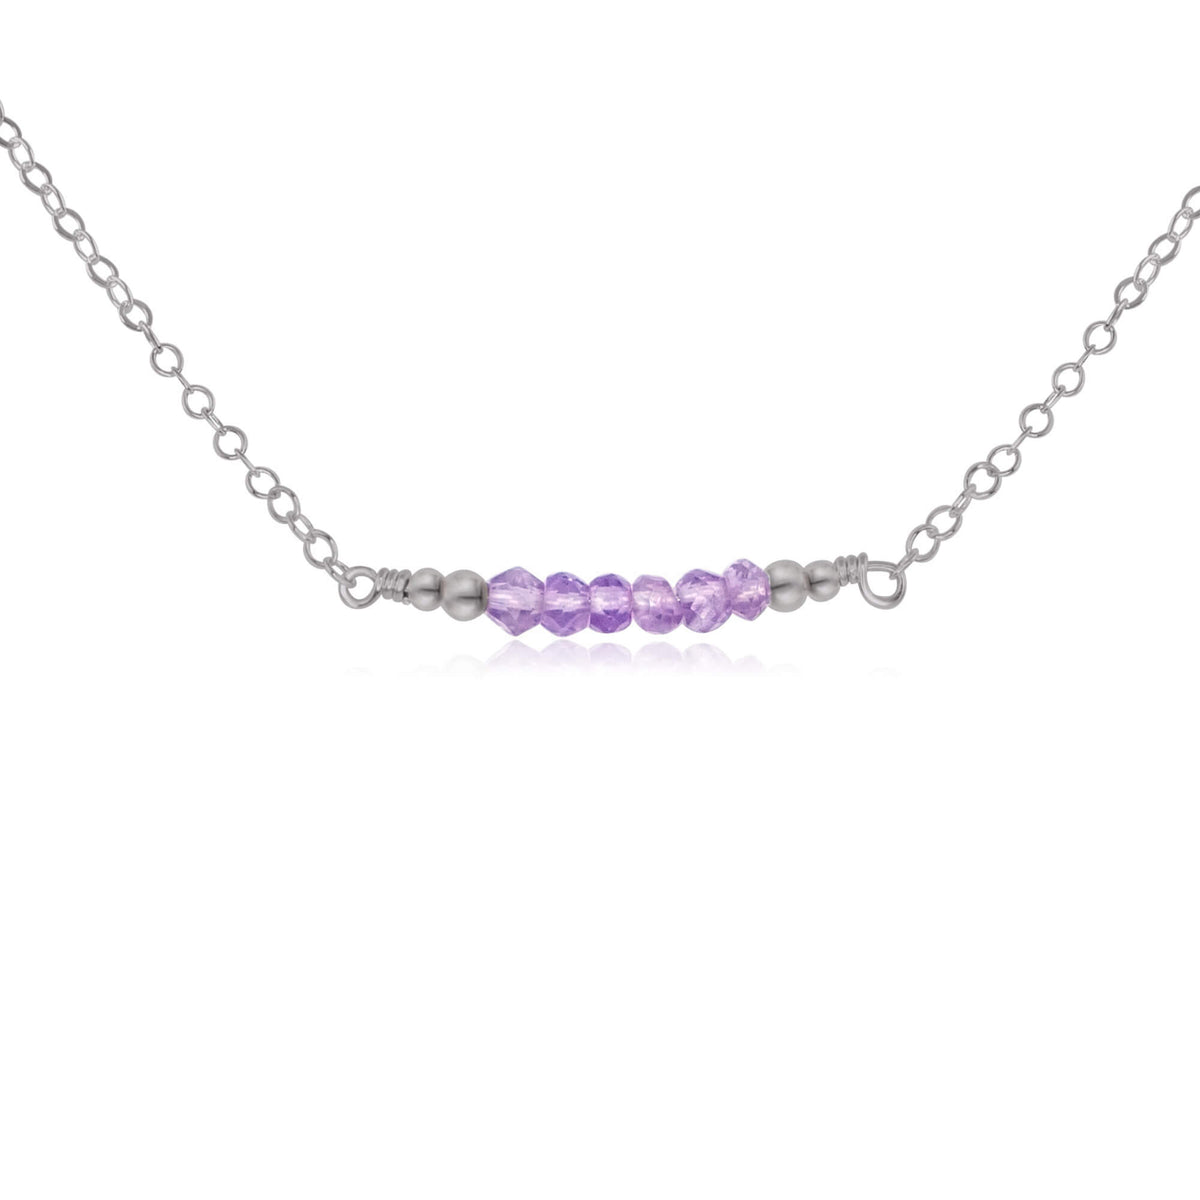 Faceted Bead Bar Necklace - Lavender Amethyst - Stainless Steel - Luna Tide Handmade Jewellery